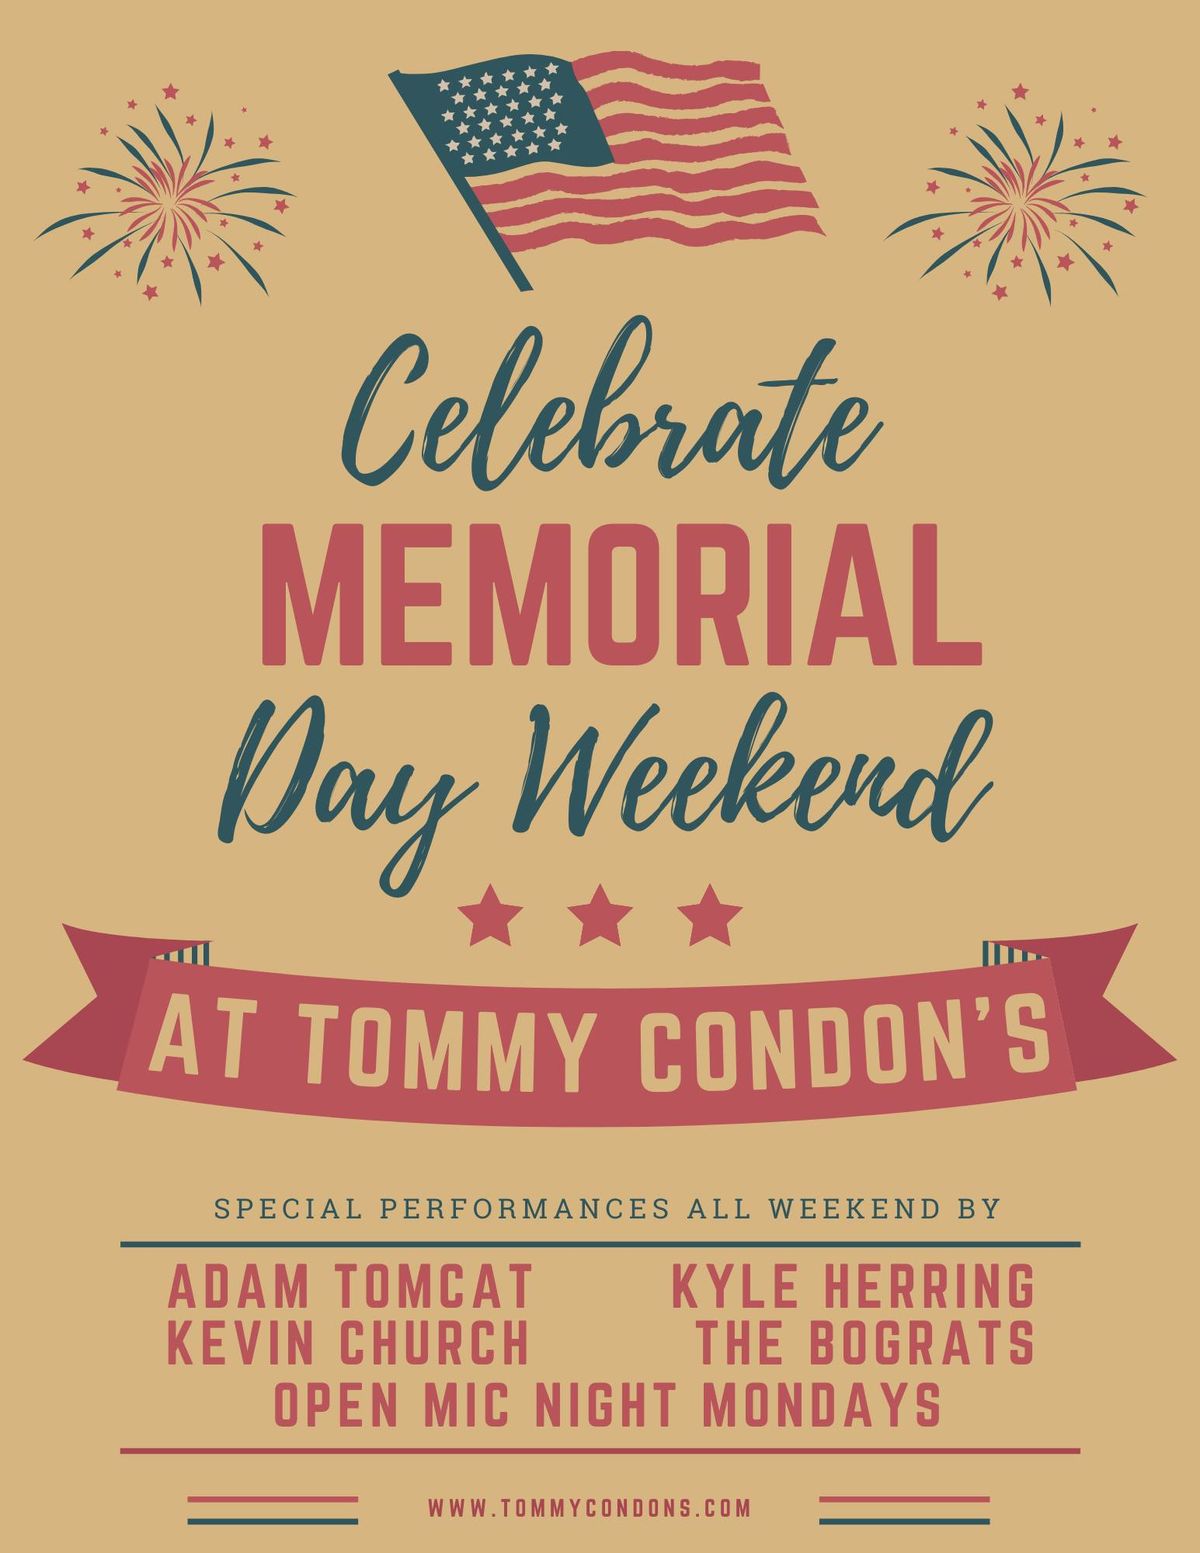 Celebrate Memorial Day Weekend at Tommy Condon's!